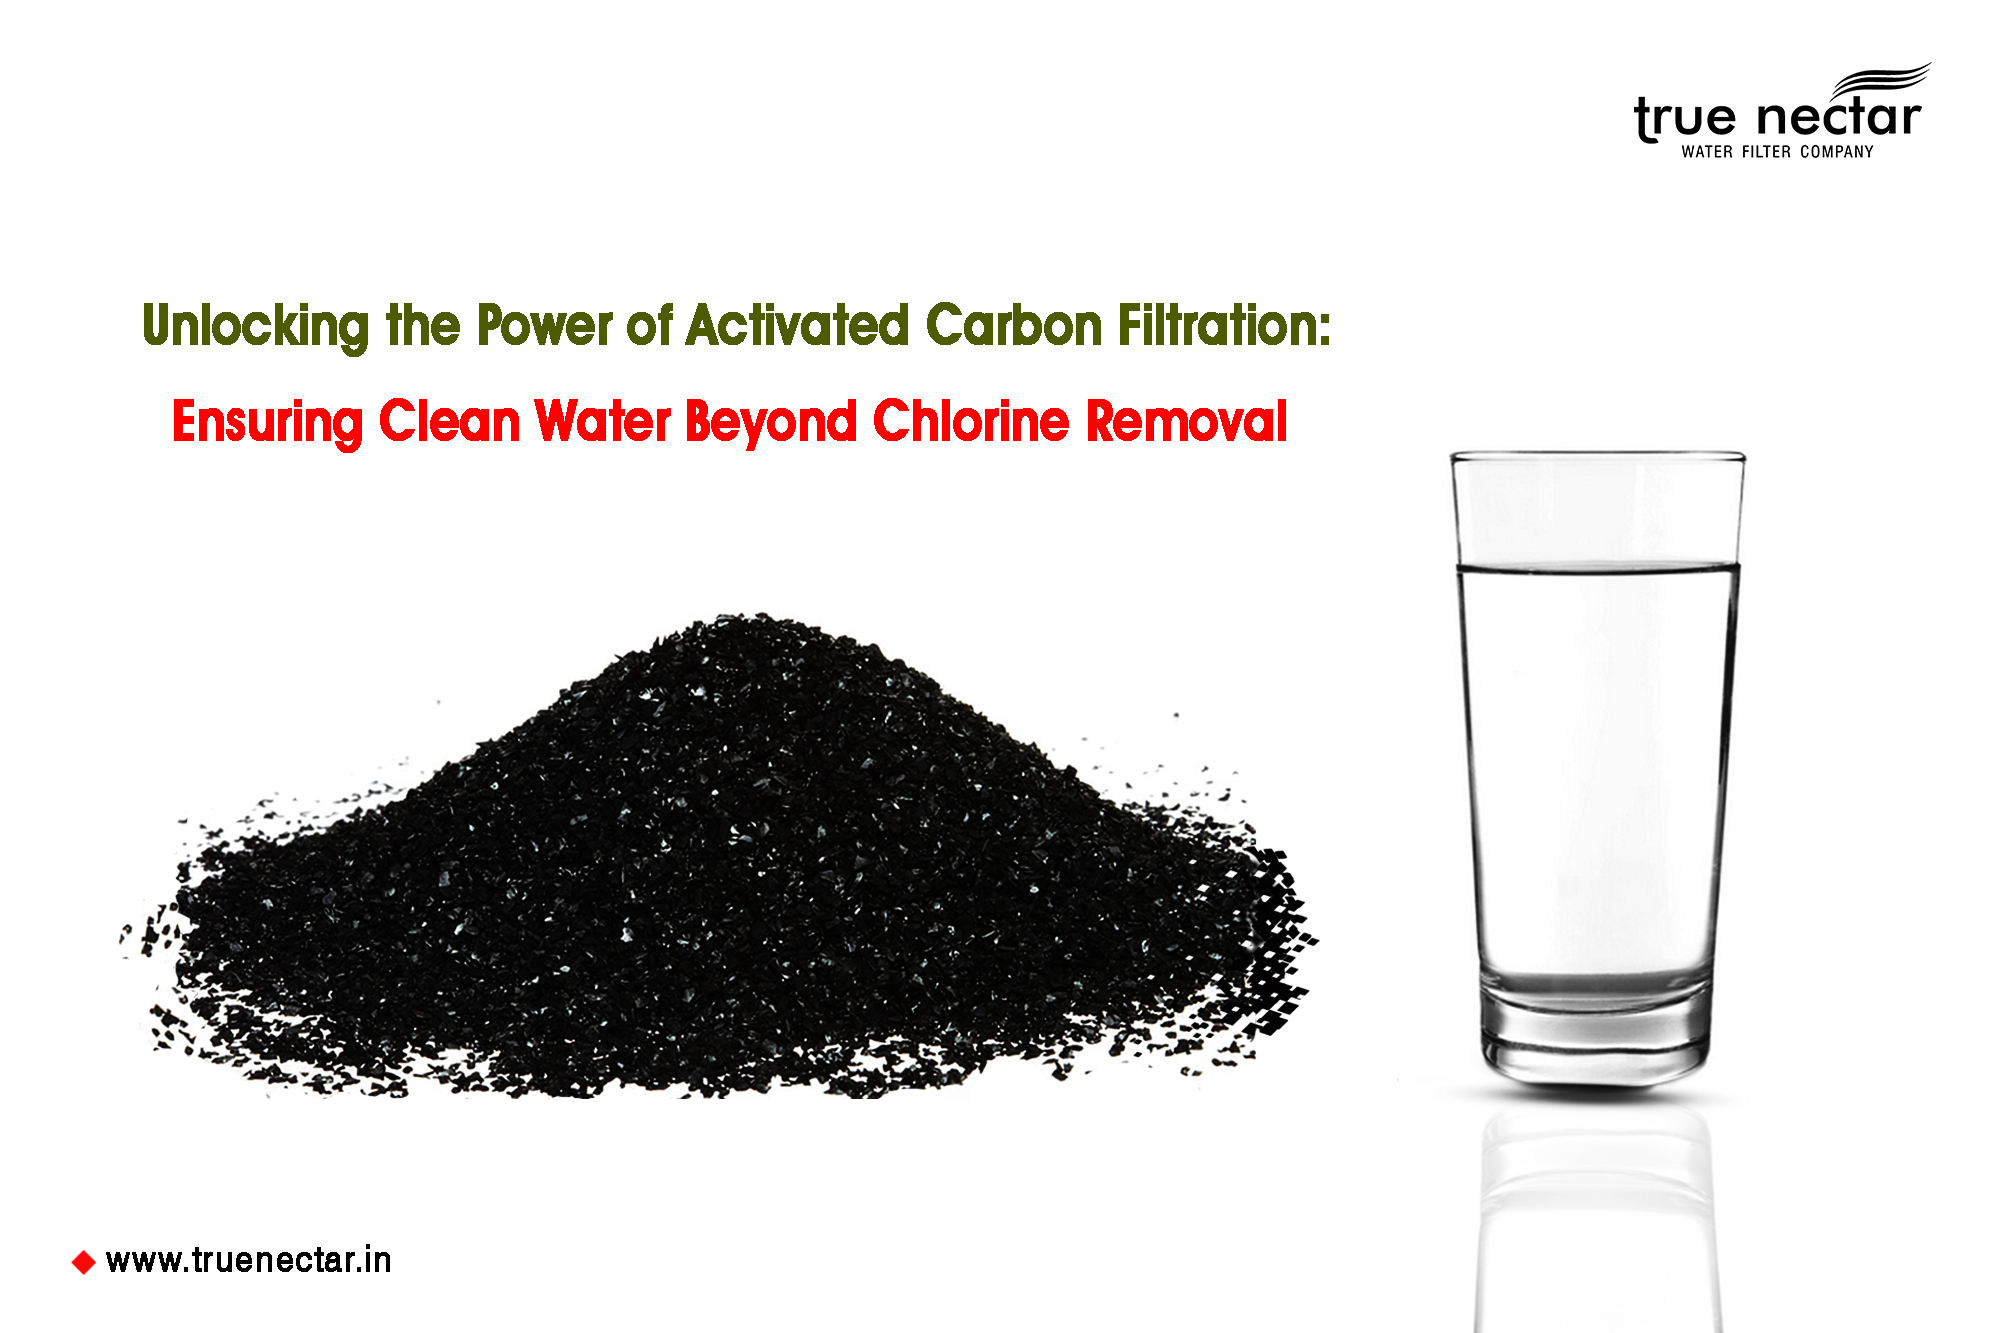 Unlocking the Power of Activated Carbon Filtration: Ensuring Clean Water Beyond Chlorine Removal